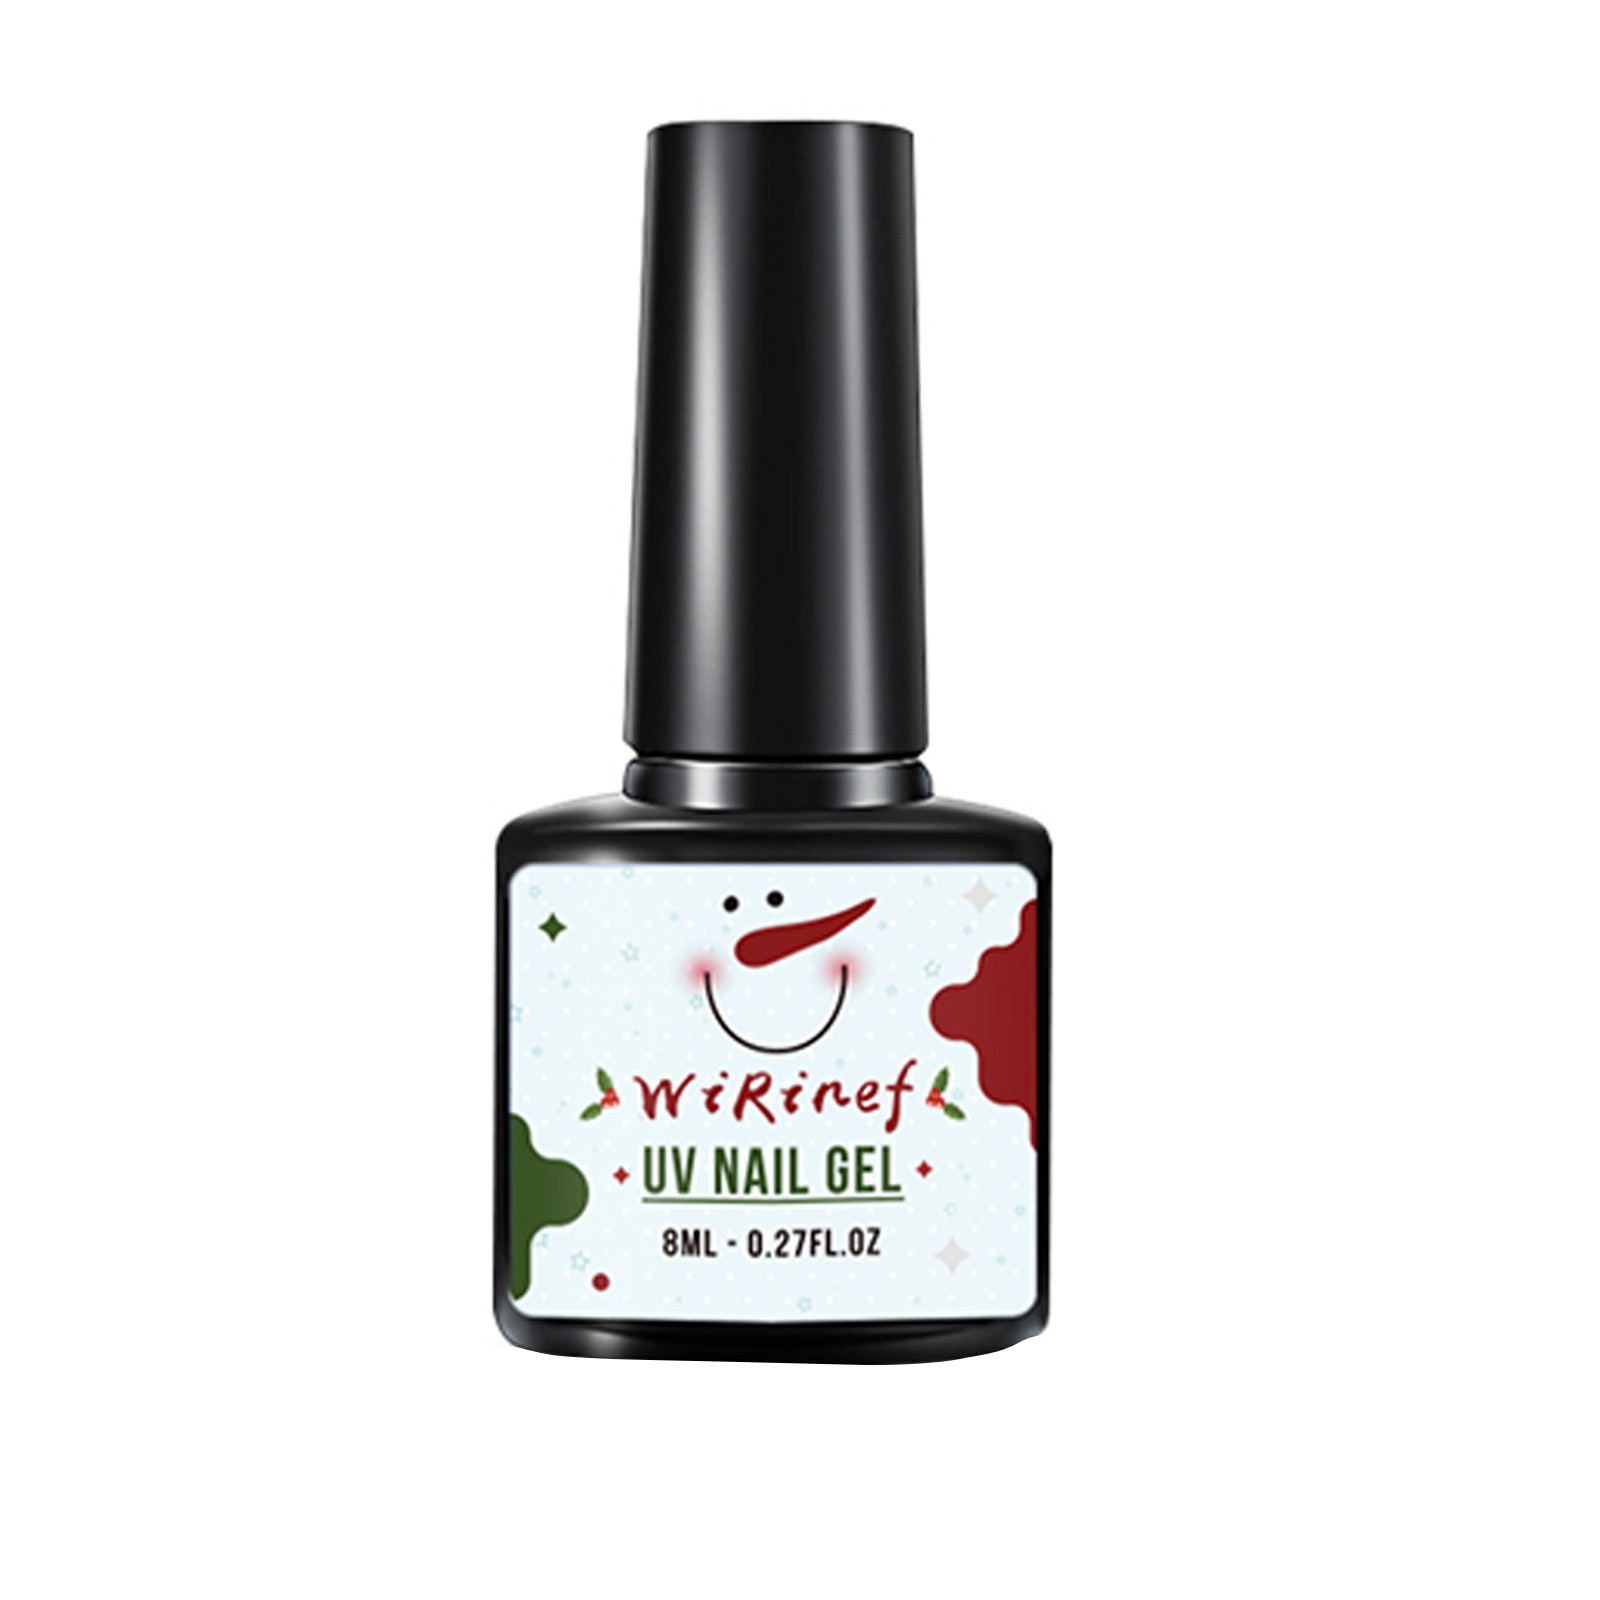 Tejiojio HoliDay Home Trends Christmas Manicure Nail Polish Glue Winter Snowman Color Changing Phototherapy Glue 8ML - image 2 of 3